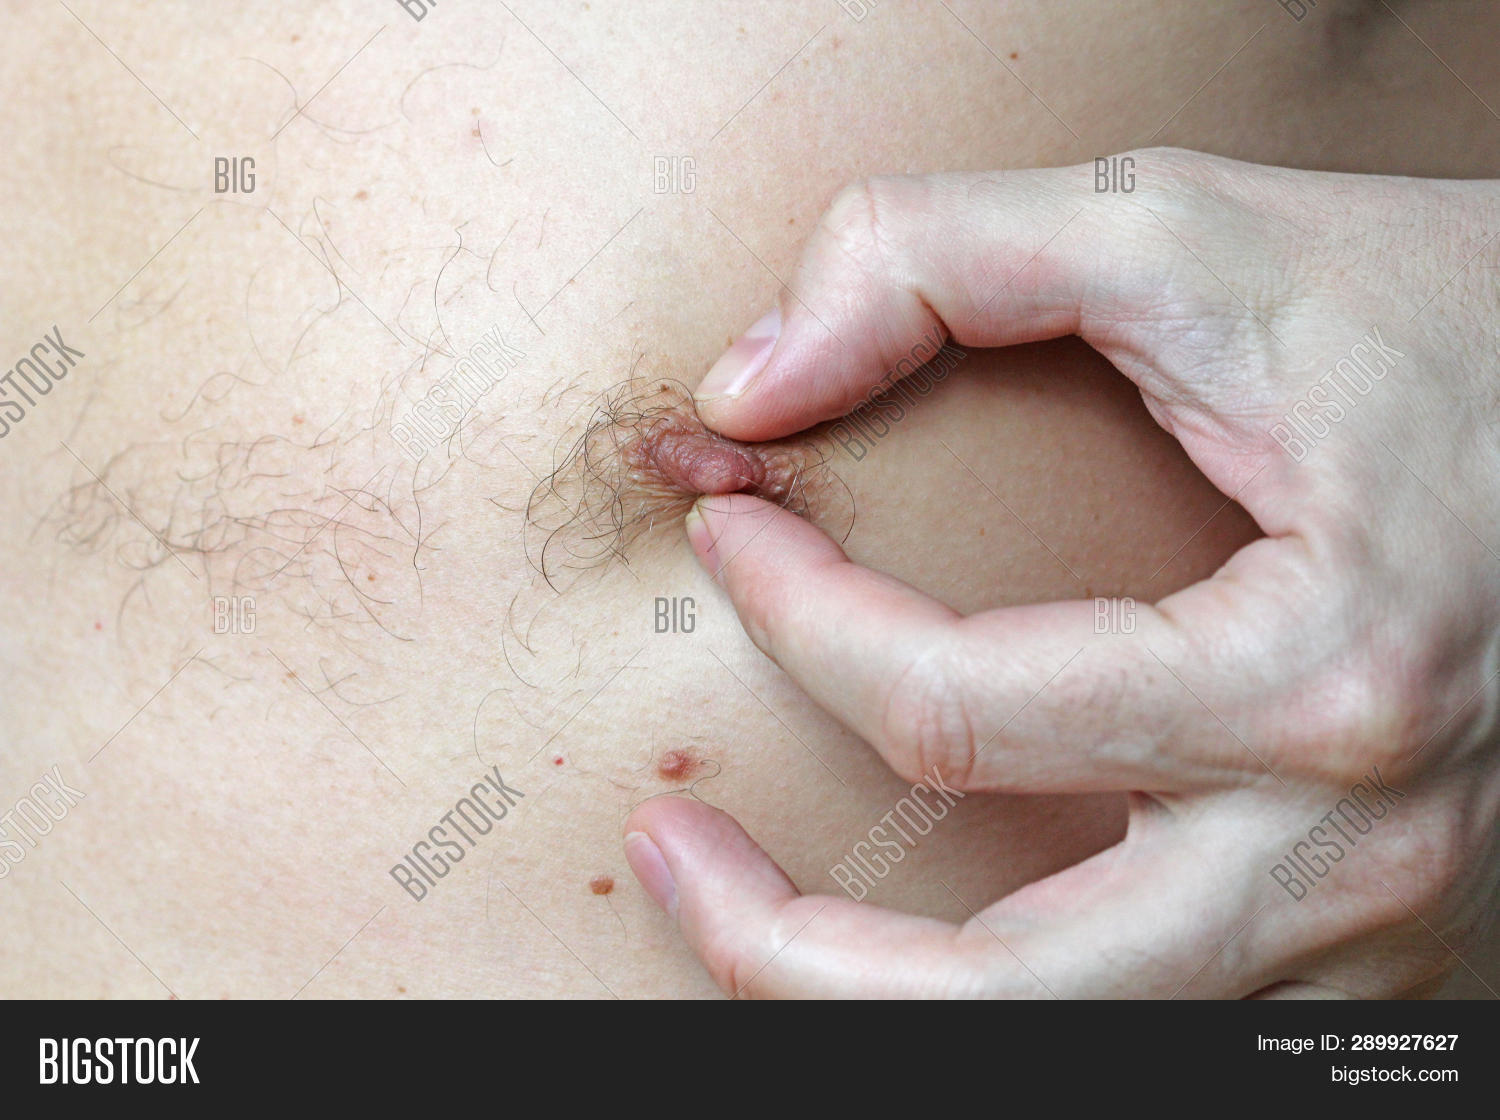 dominic orr recommends Hairy Nipple Photos